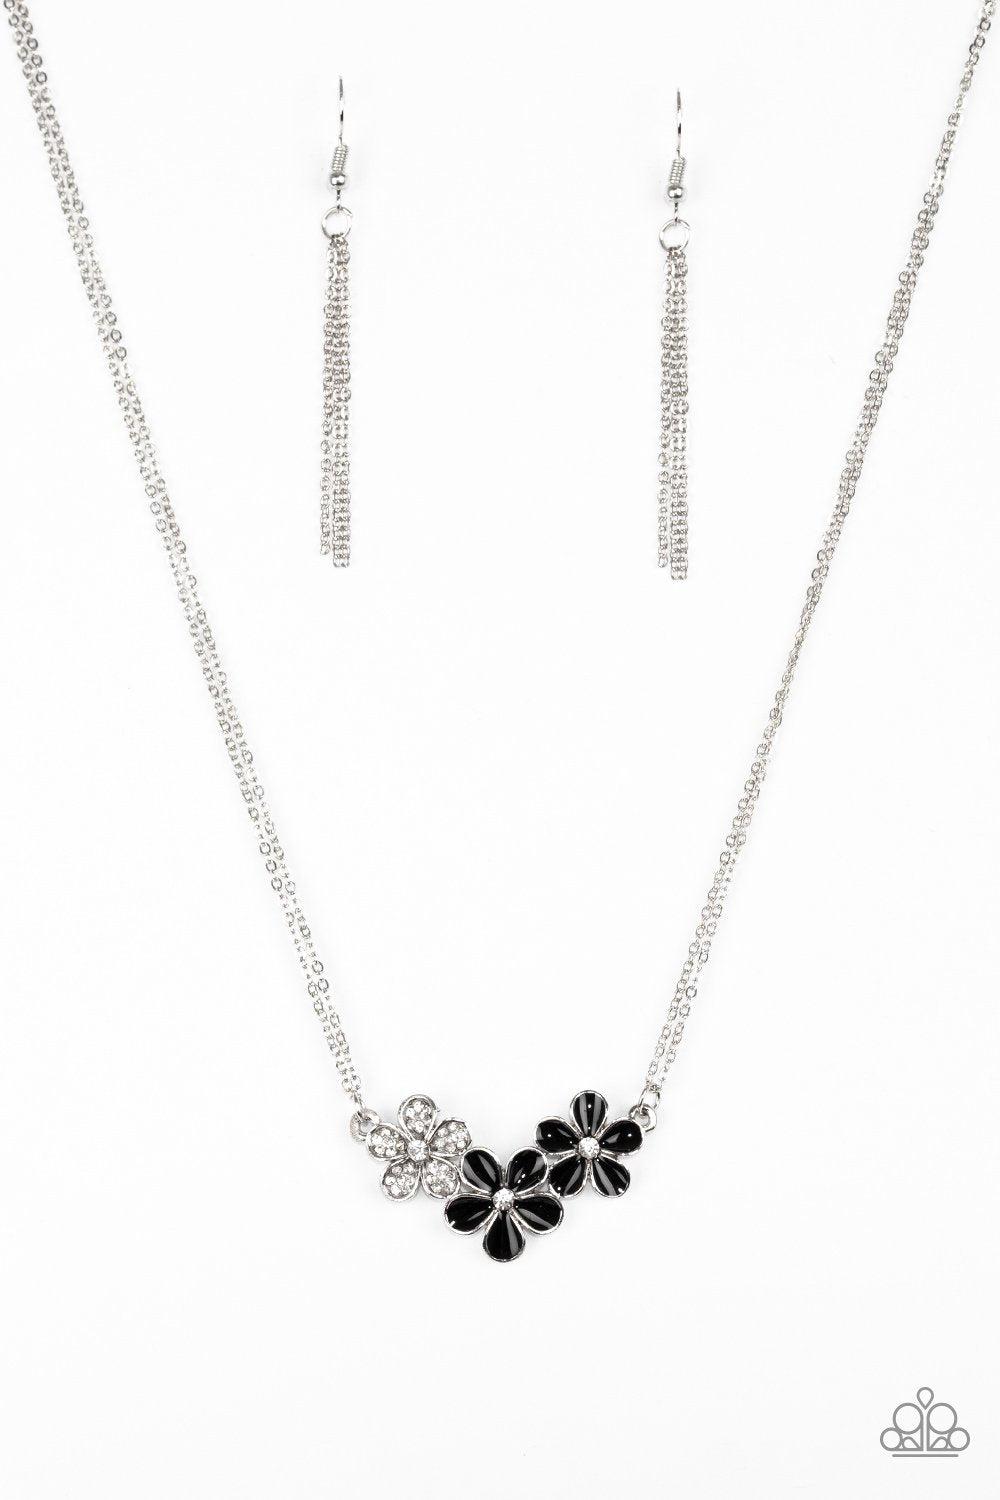 Hibiscus Haciendas Black Flower Necklace and matching Earrings - Paparazzi Accessories-CarasShop.com - $5 Jewelry by Cara Jewels